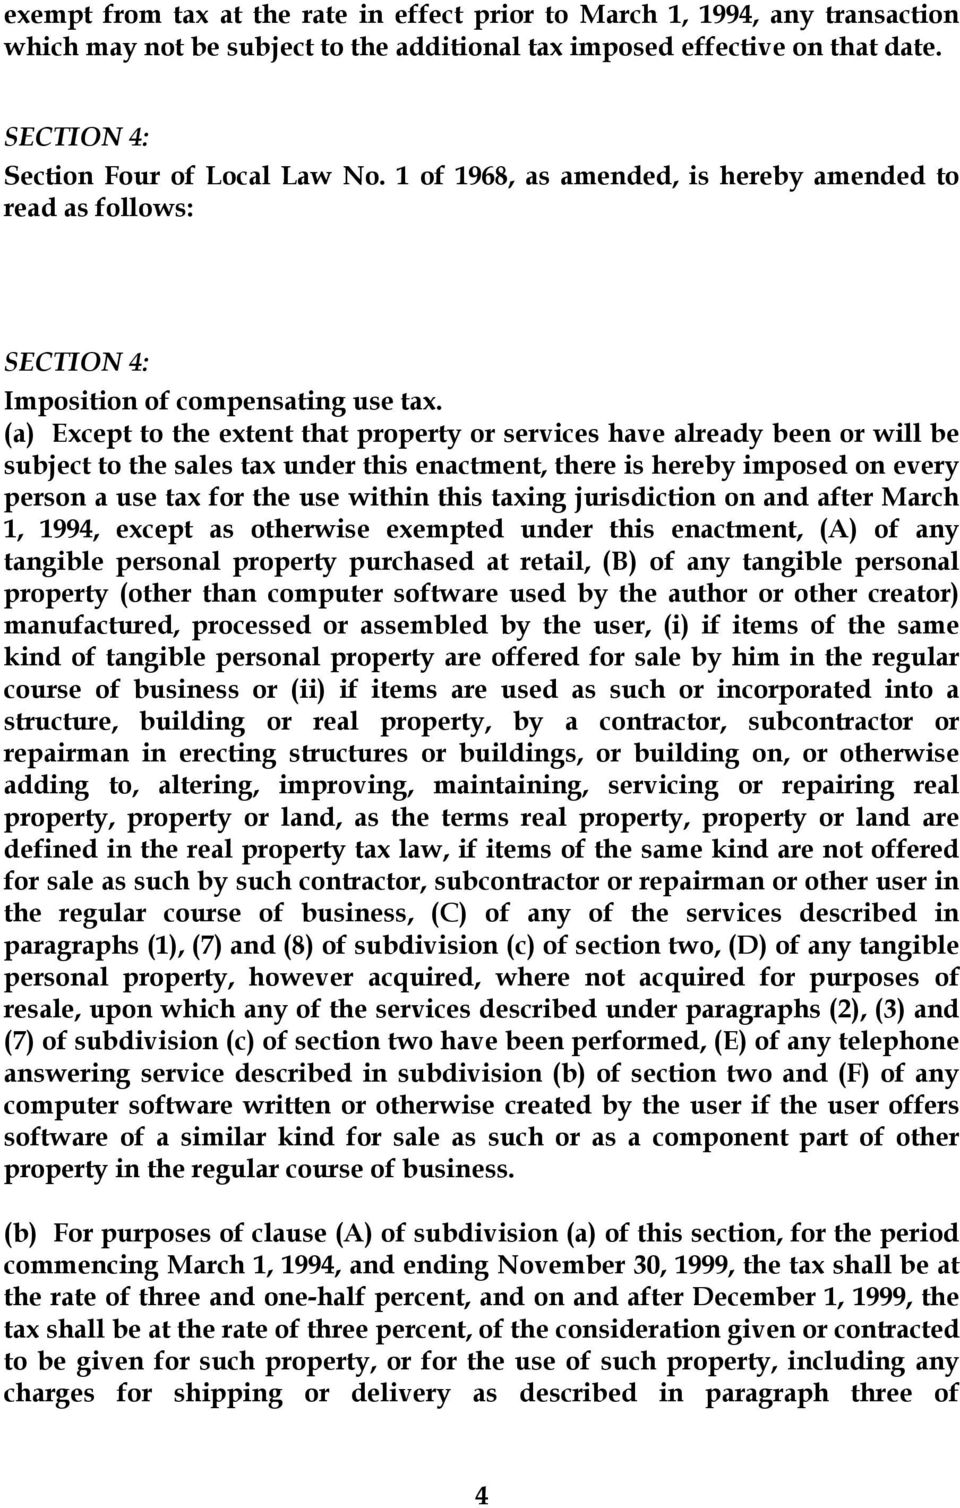 (a) Except to the extent that property or services have already been or will be subject to the sales tax under this enactment, there is hereby imposed on every person a use tax for the use within